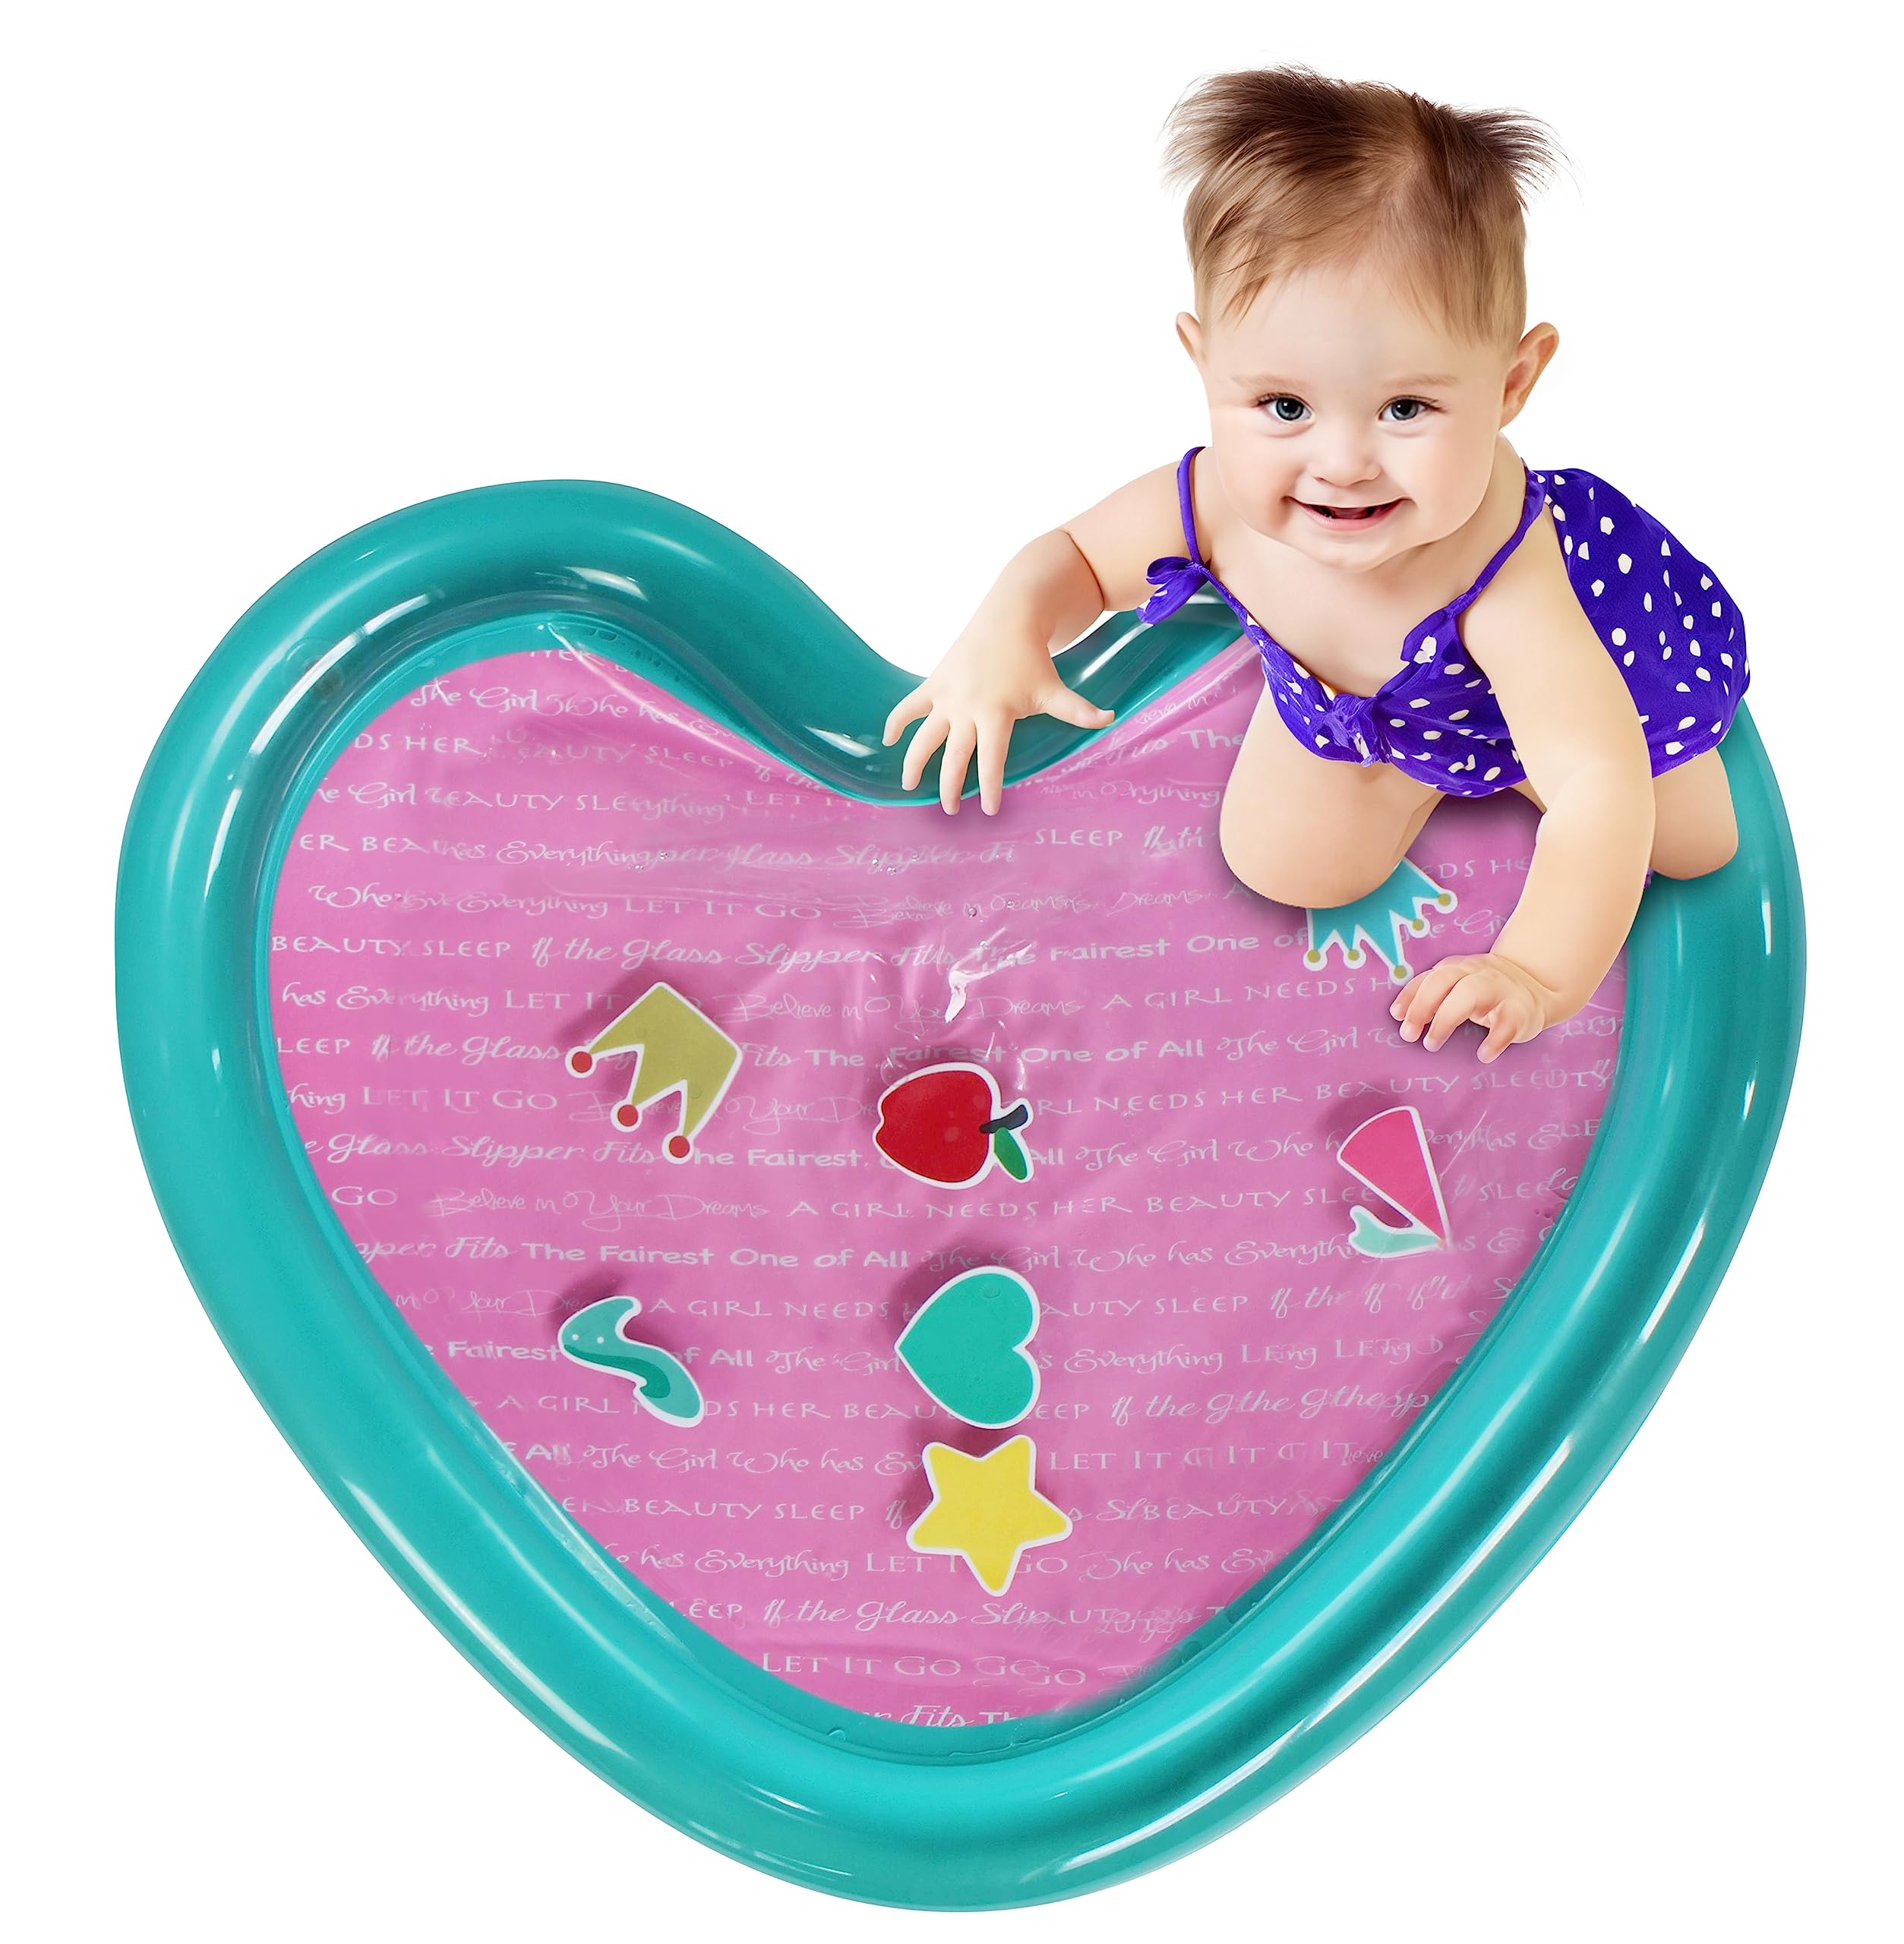 LaLa Lou Kids Tummy Time Mat, Premium XL Inflatable Tummy Time Water Play Mat with Sensory Stimulation Toys Promoting Motor Skil